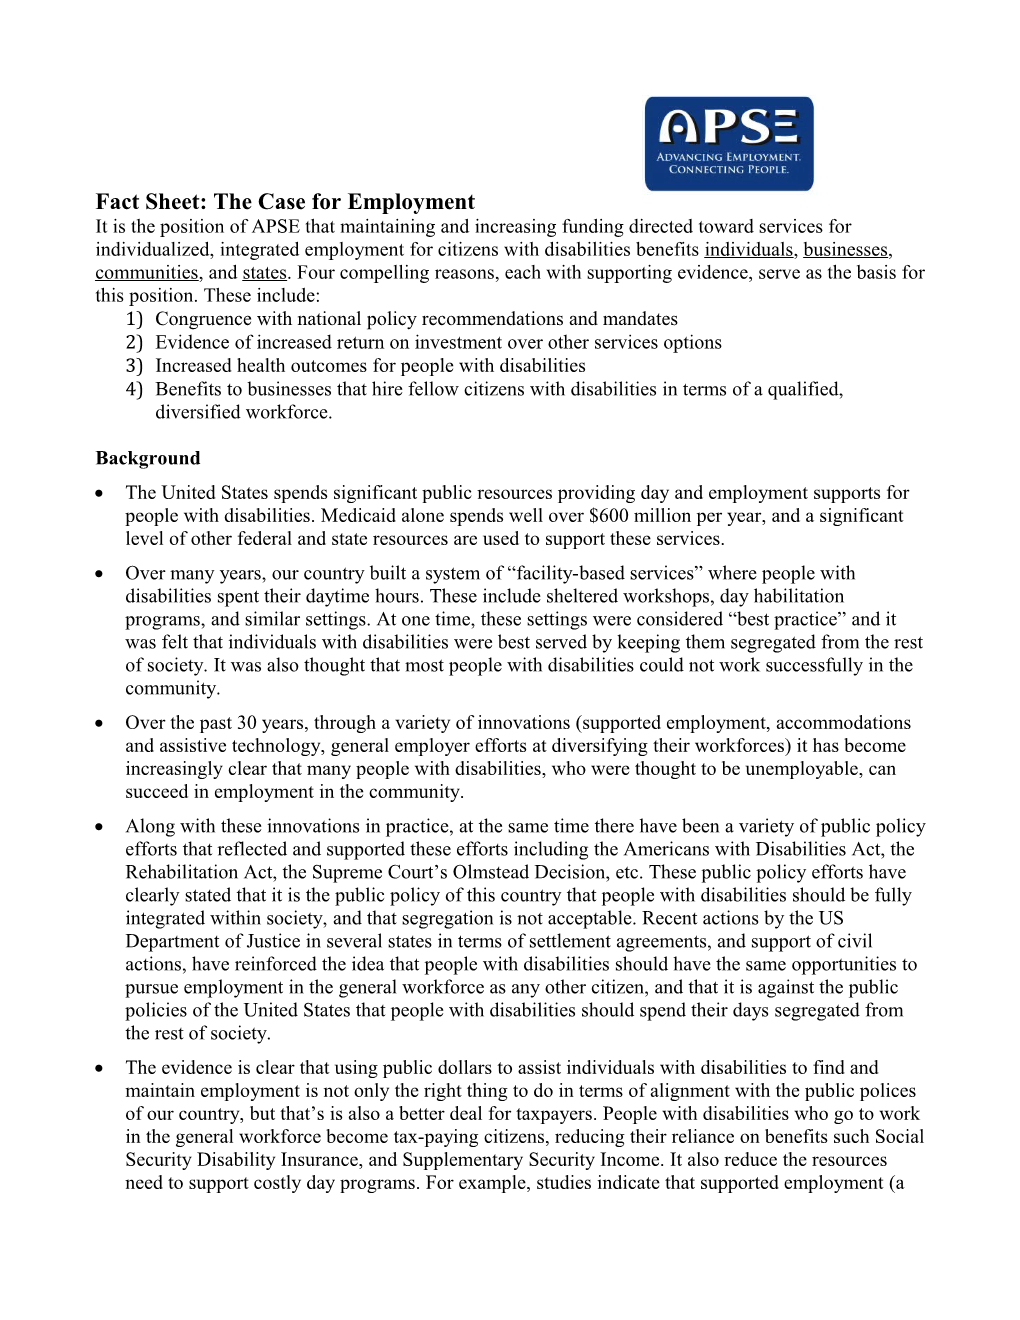 Fact Sheet: the Case for Employment